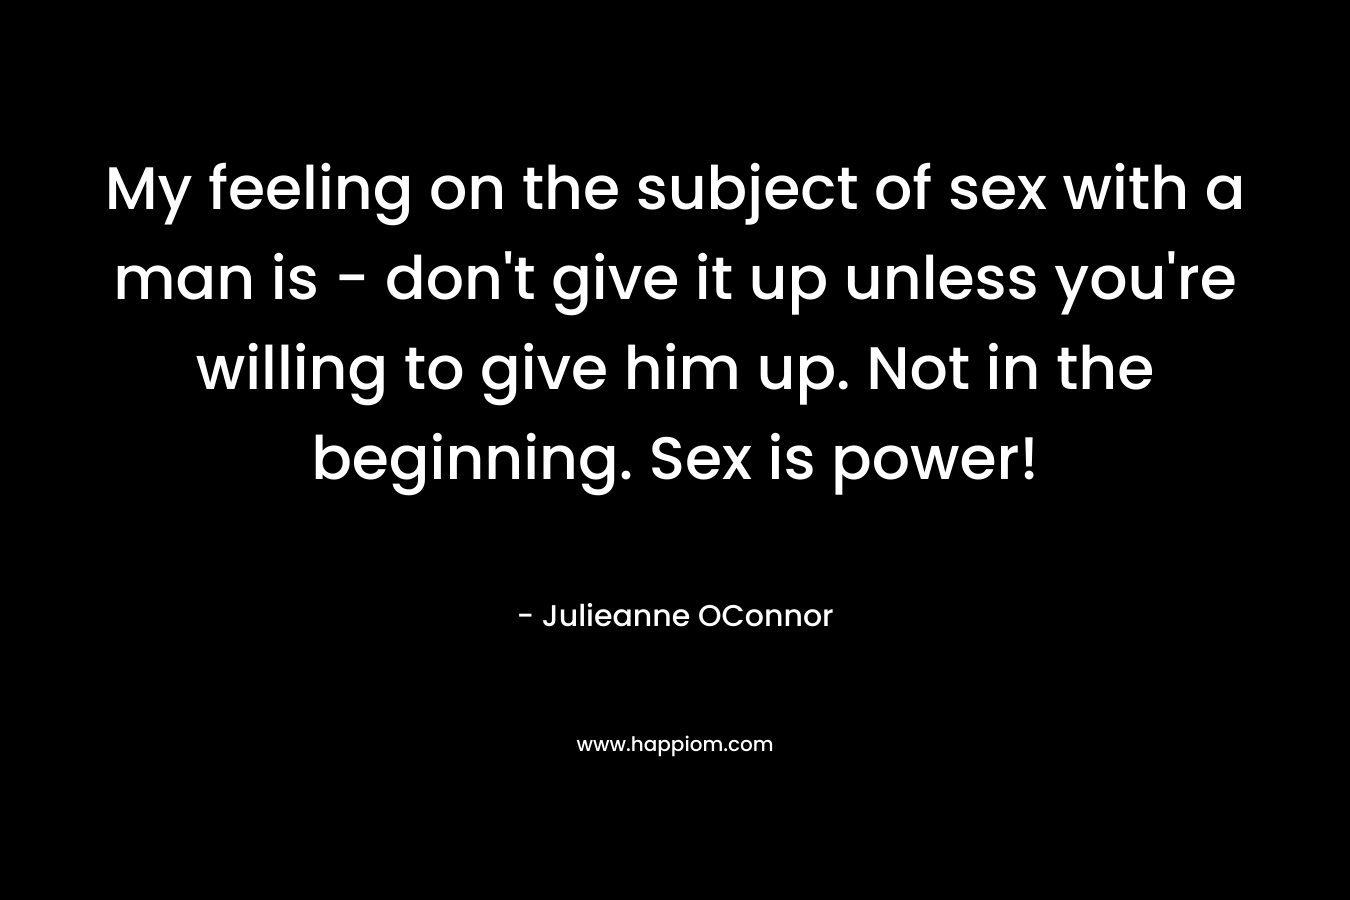 My feeling on the subject of sex with a man is - don't give it up unless you're willing to give him up. Not in the beginning. Sex is power!